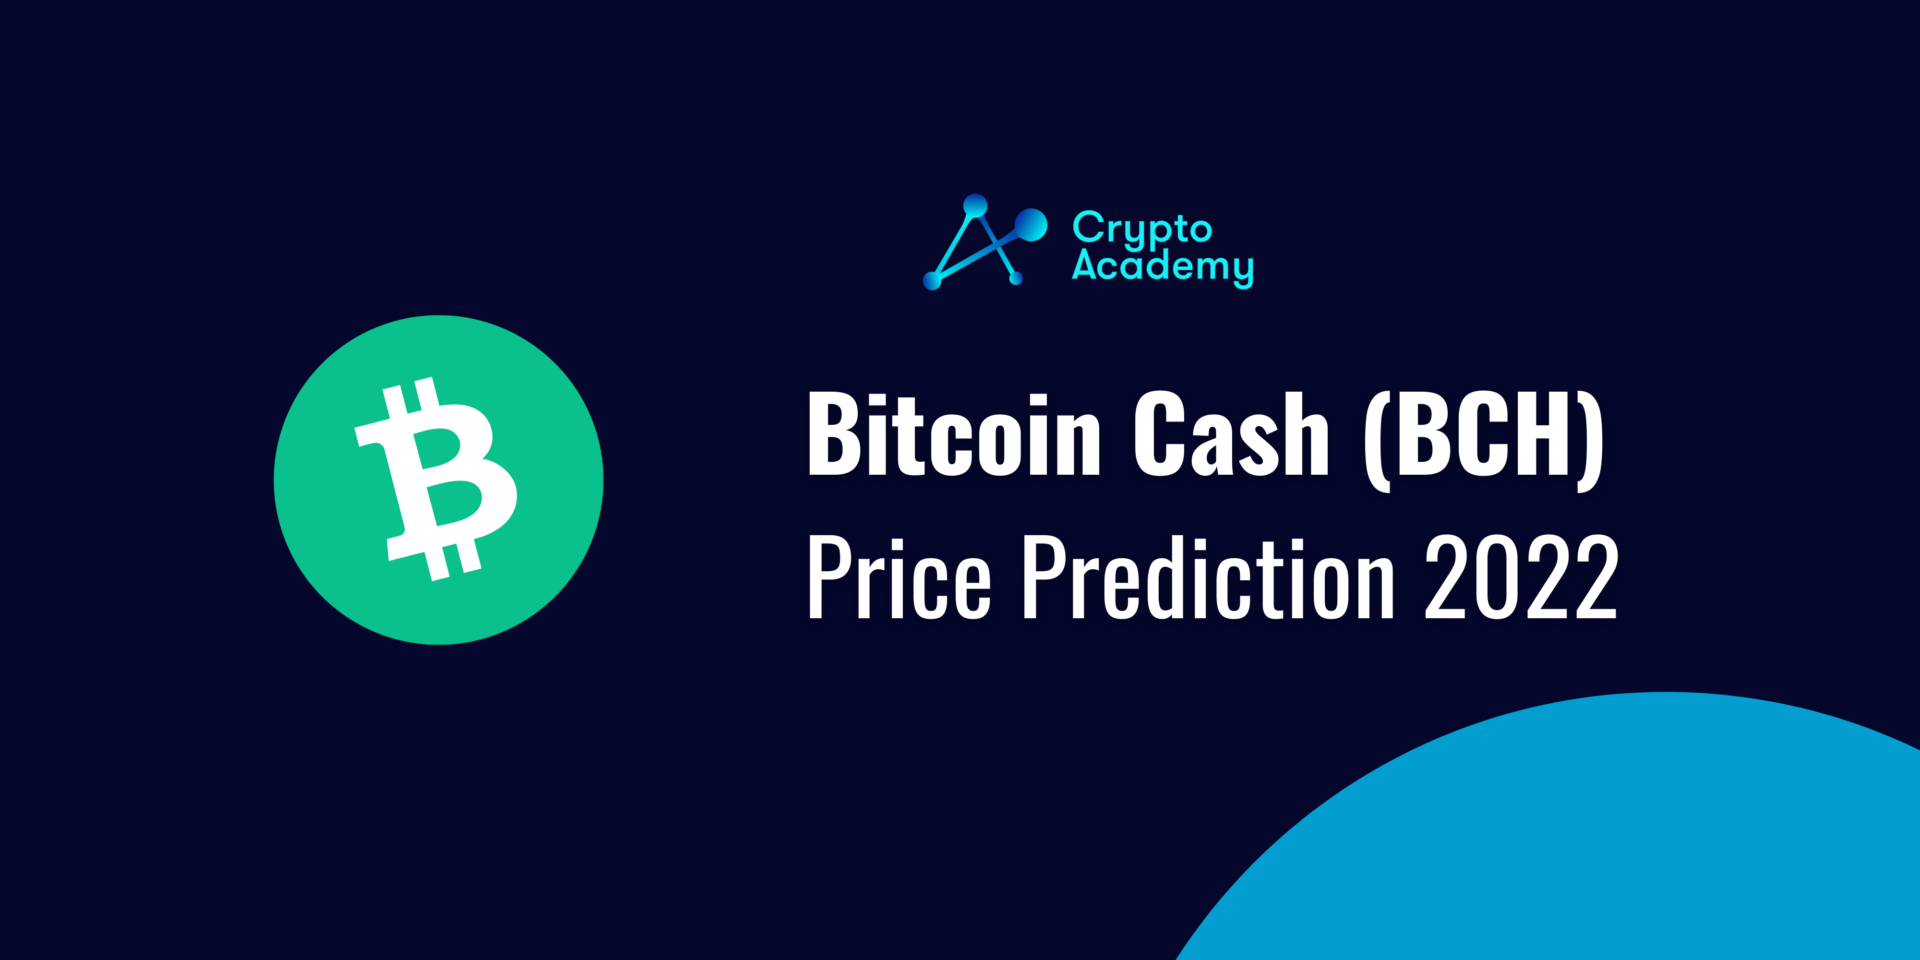 eCash aka Bitcoin Cash ABC (BCHA)  Price Prediction 2021 and Beyond – Is BCH a Good Investment?